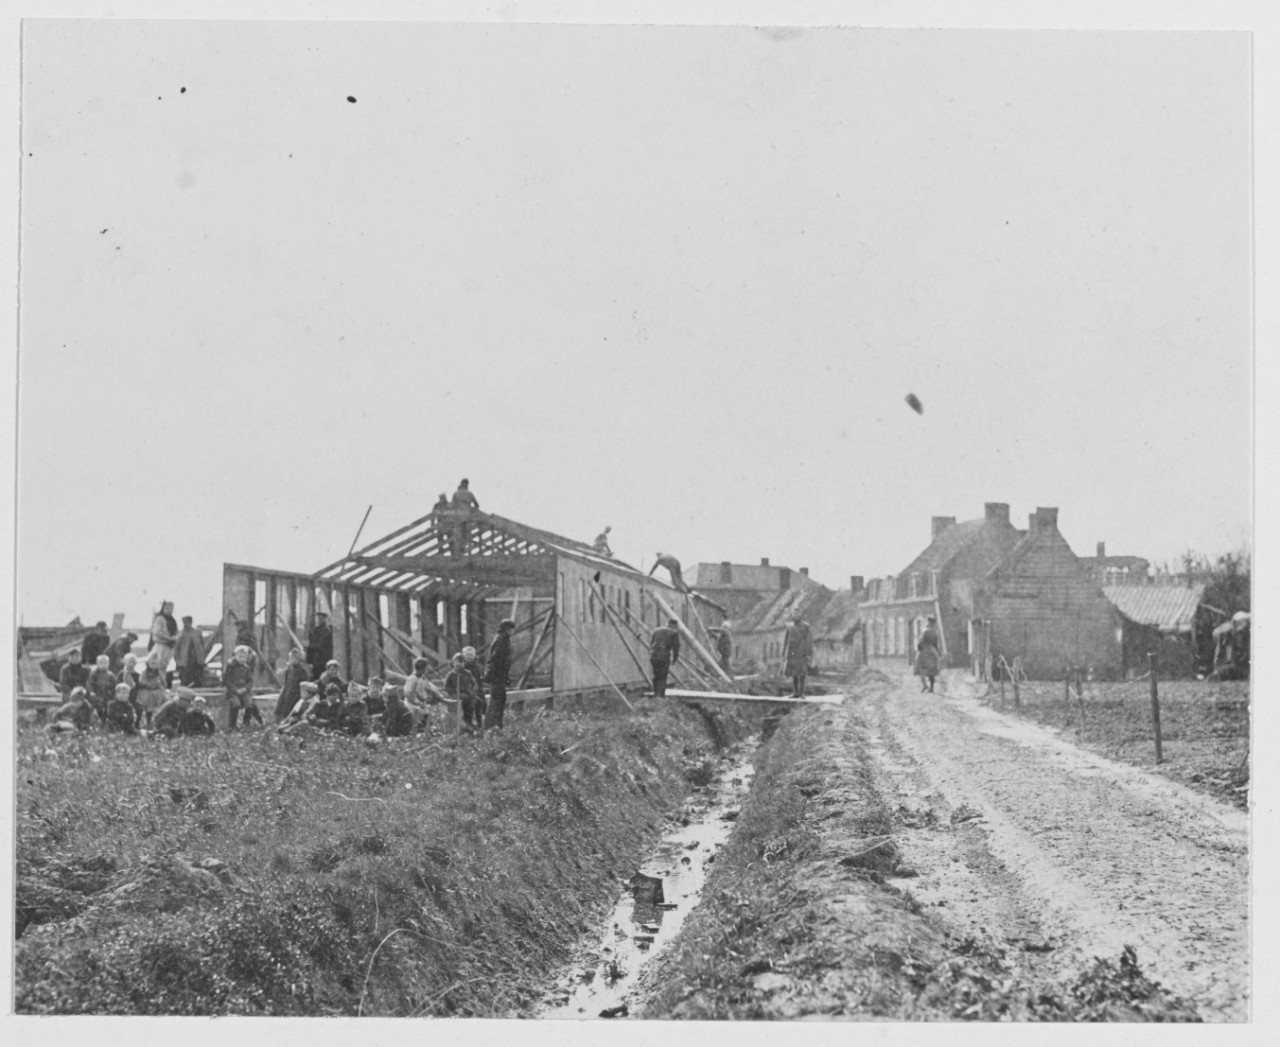 Navy relief work near Lille and Cambrai, France during World War I. Men and building being constructed. 1919